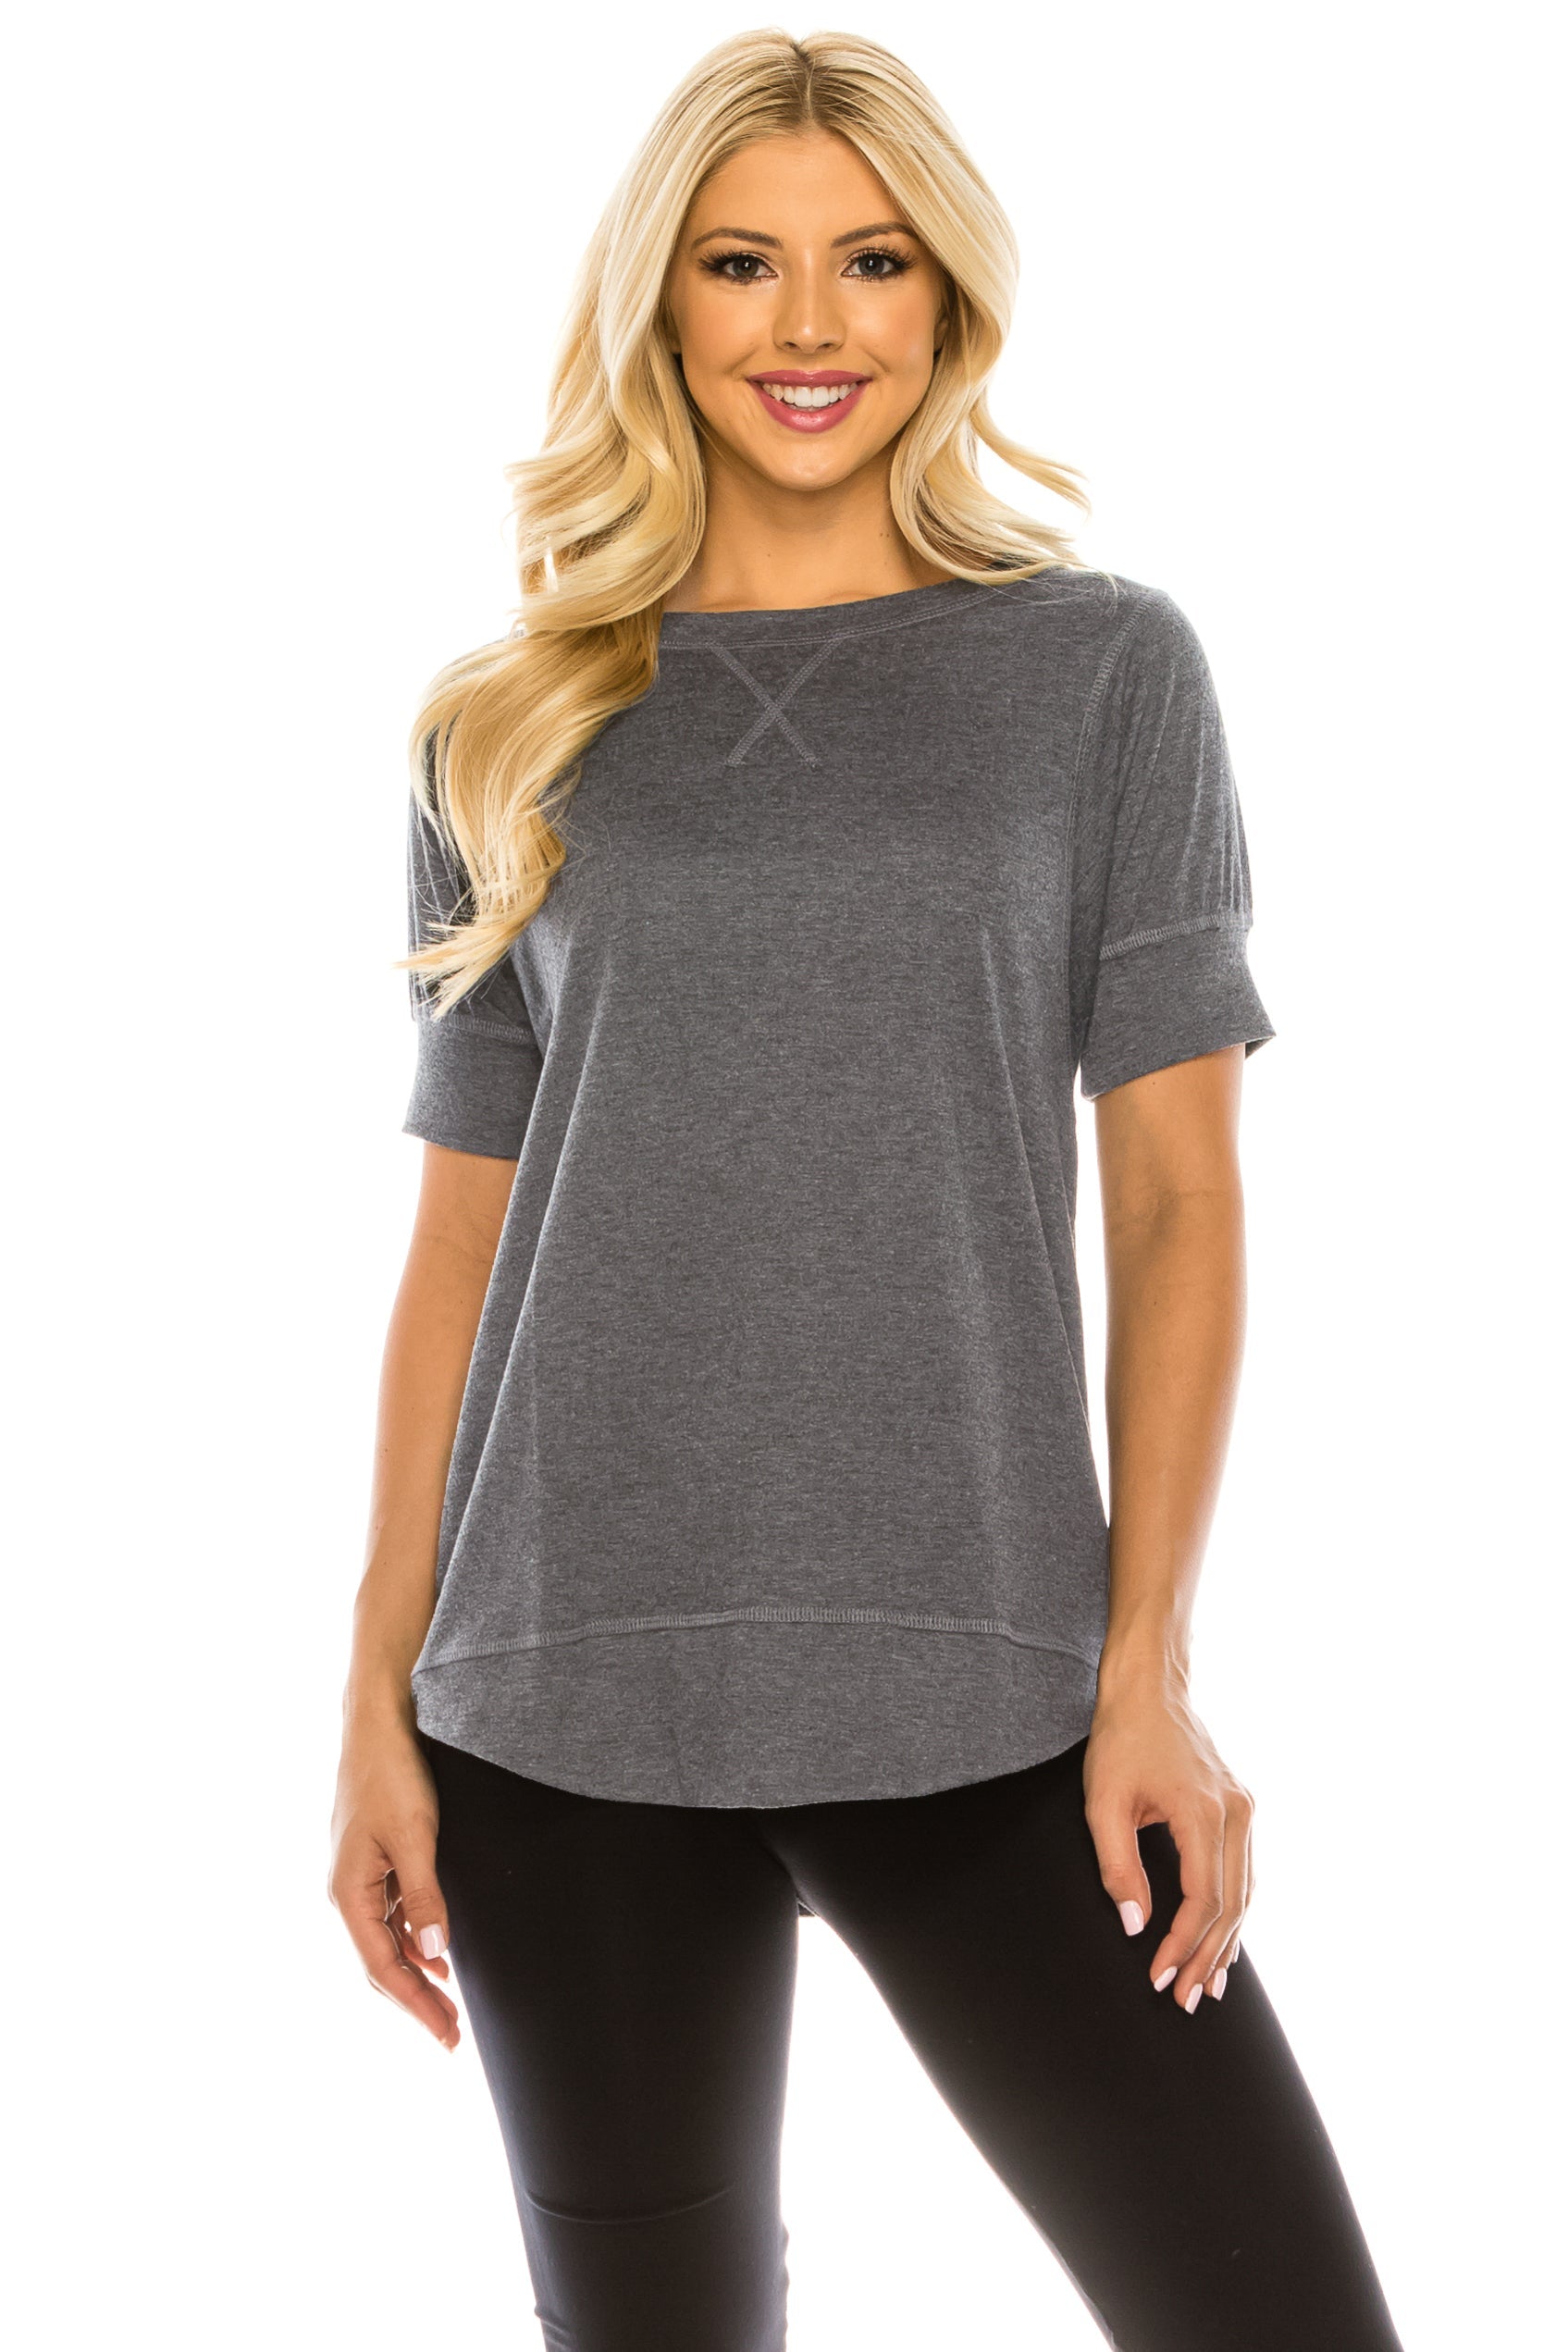 Haute Edition Casual Loose Fit Raglan Cross Stitch Comfy Tees. Plus Sizes Available DAILYHAUTE